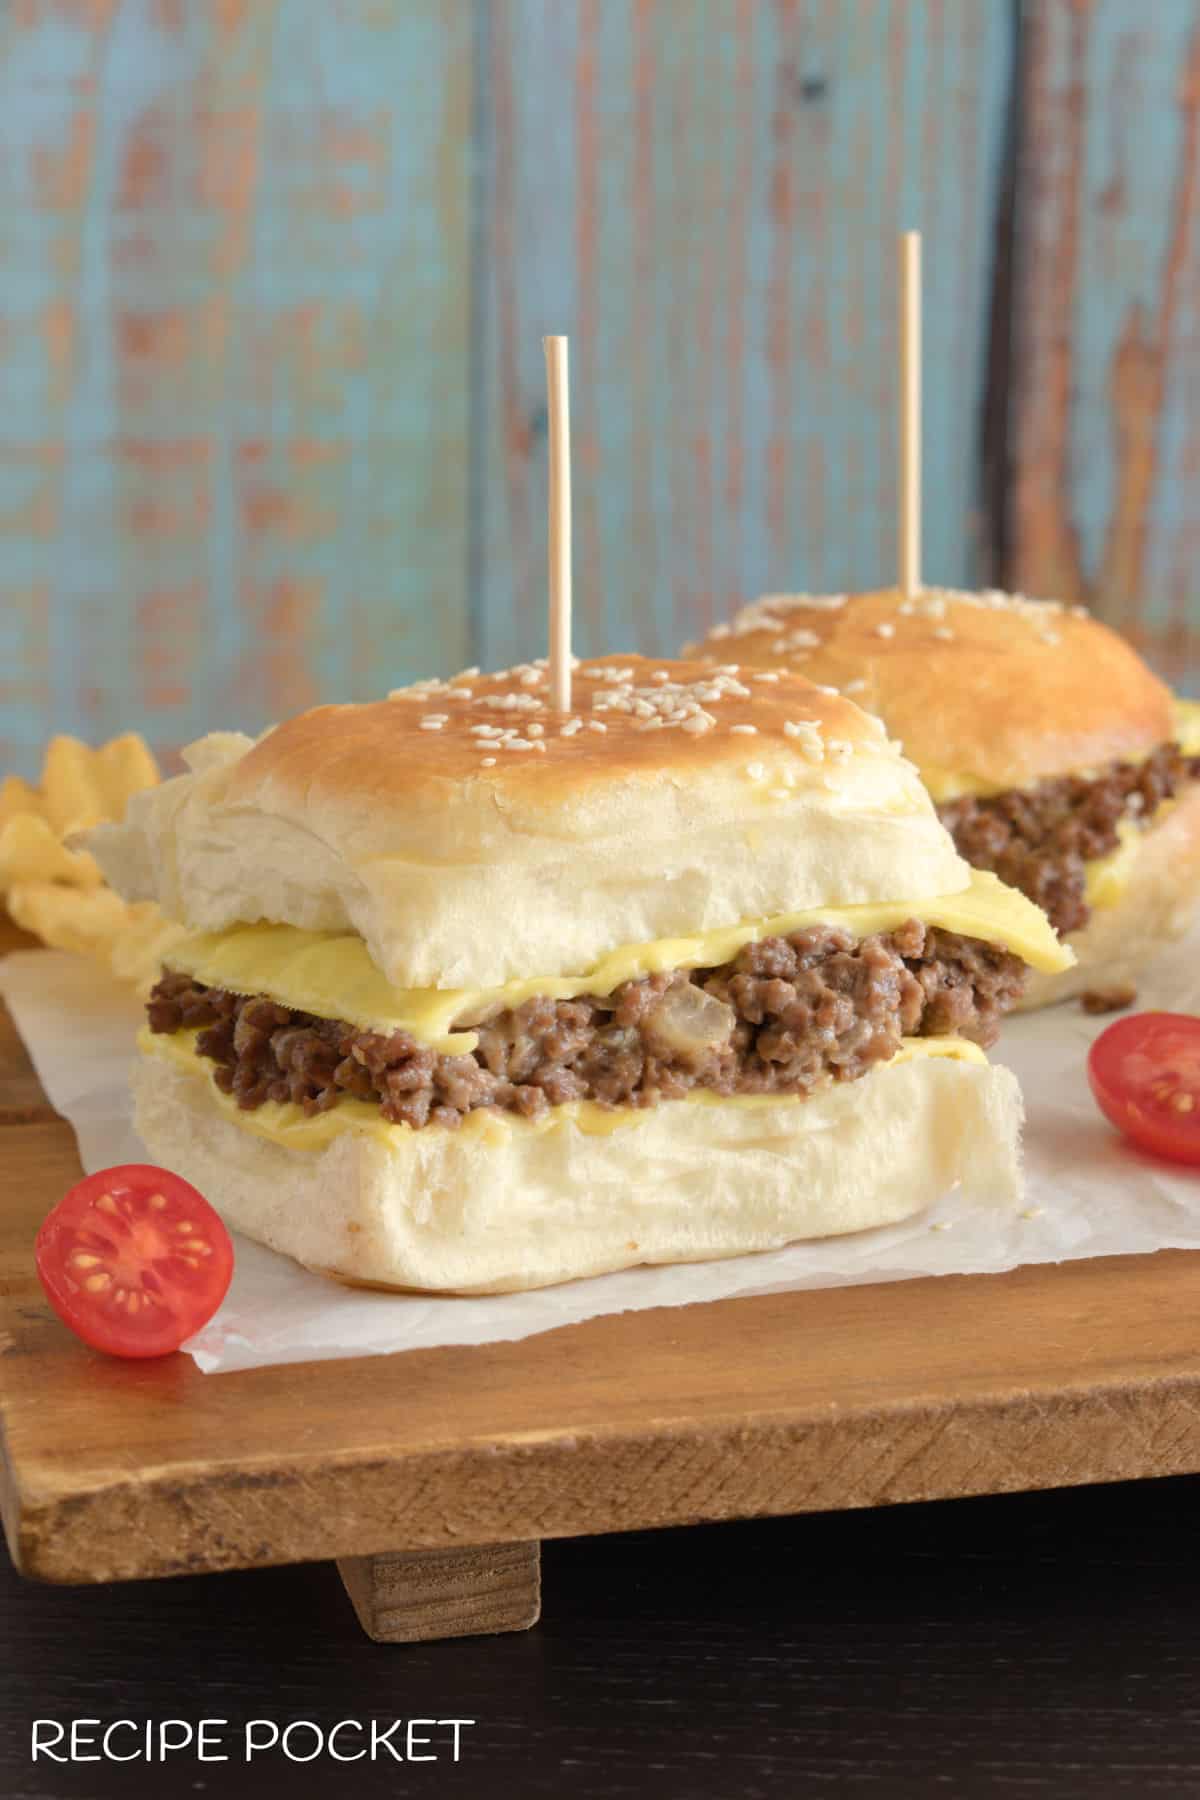 Burgers with skewers in them.